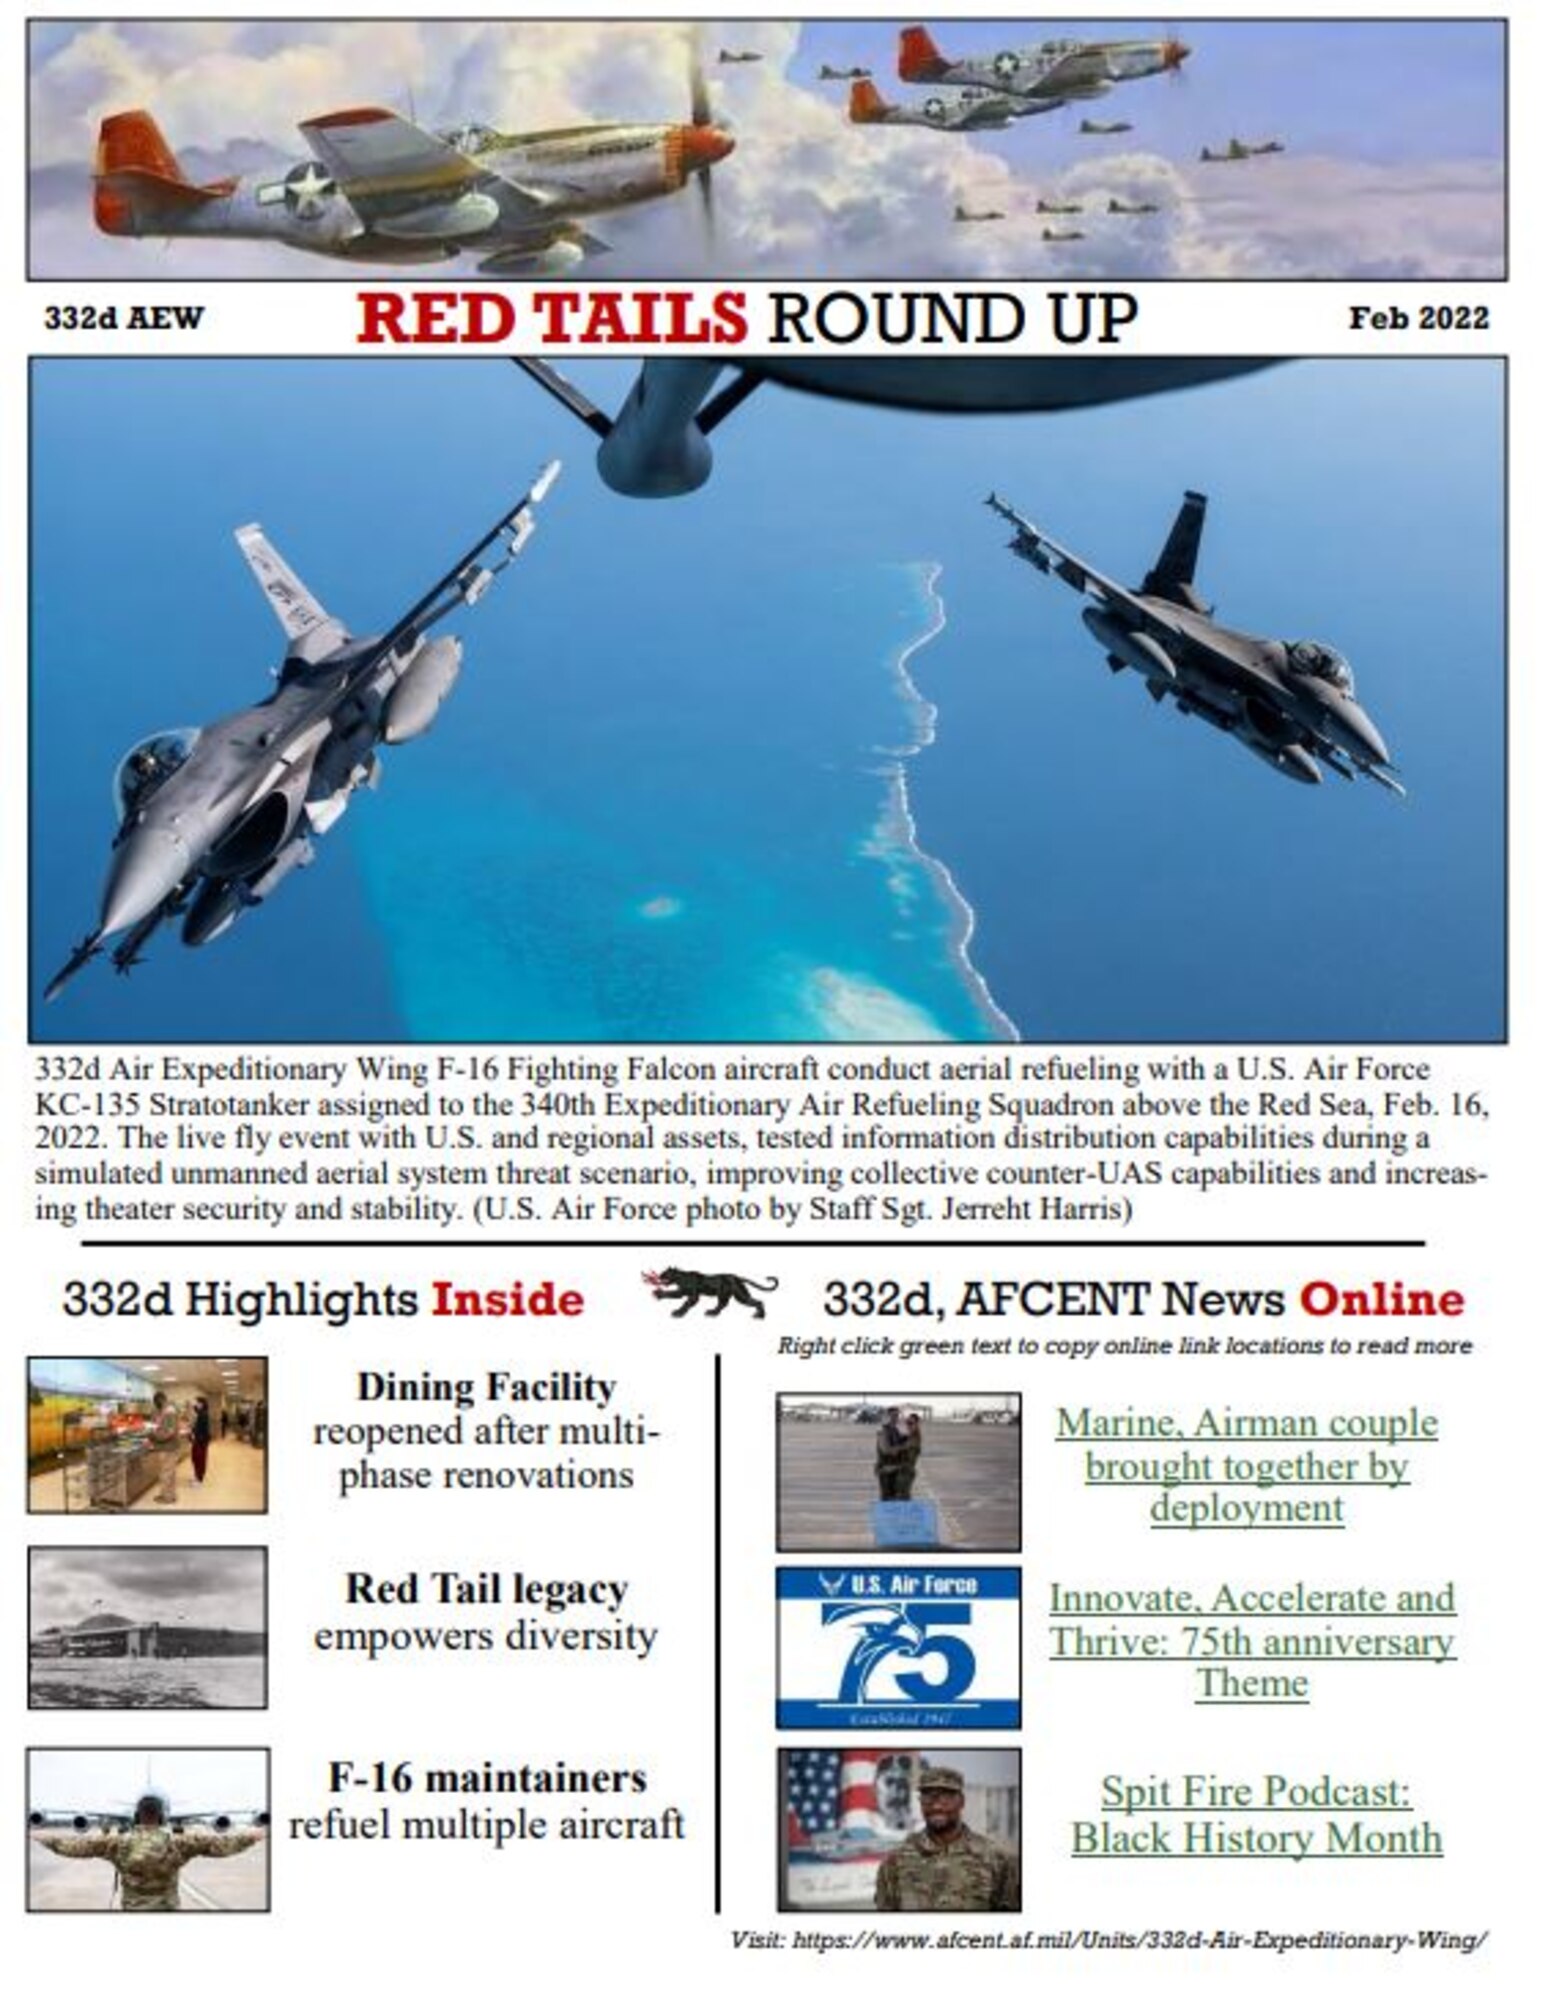 February 2022 Red Tail Round Up cover